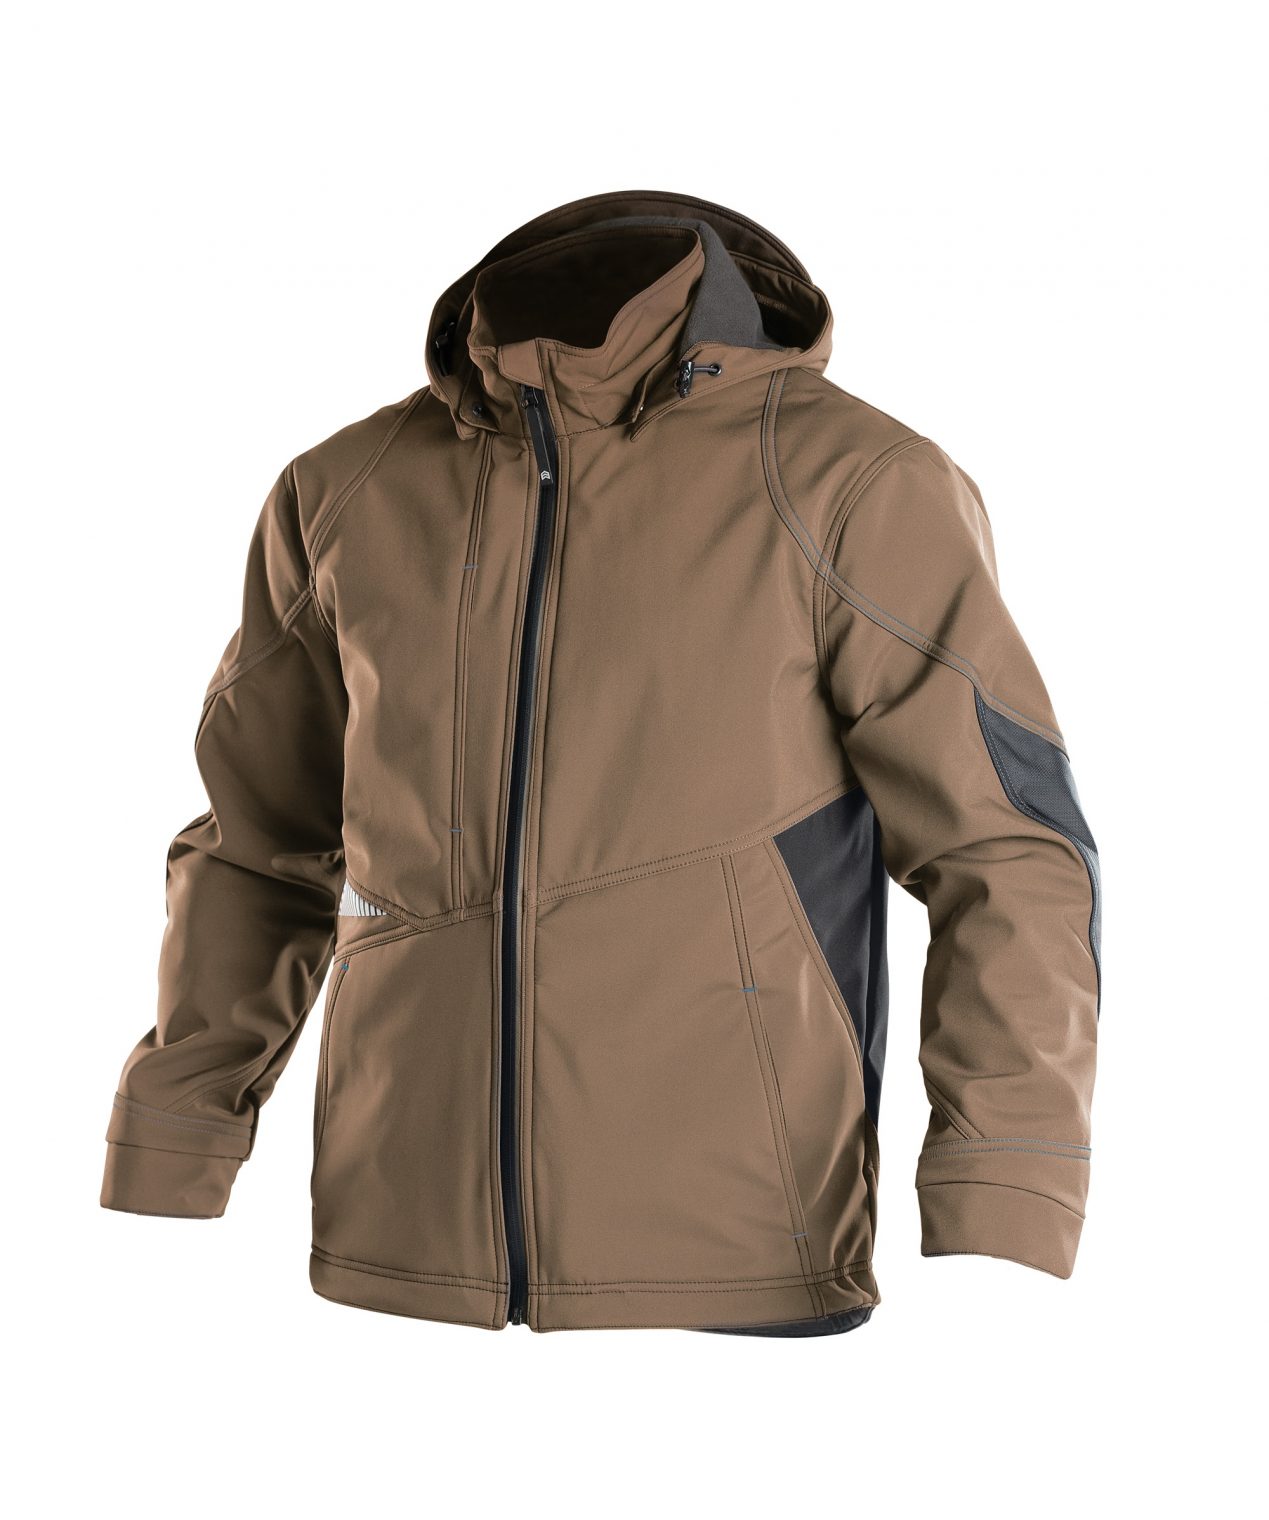 gravity softshell jacket clay brown anthracite grey front